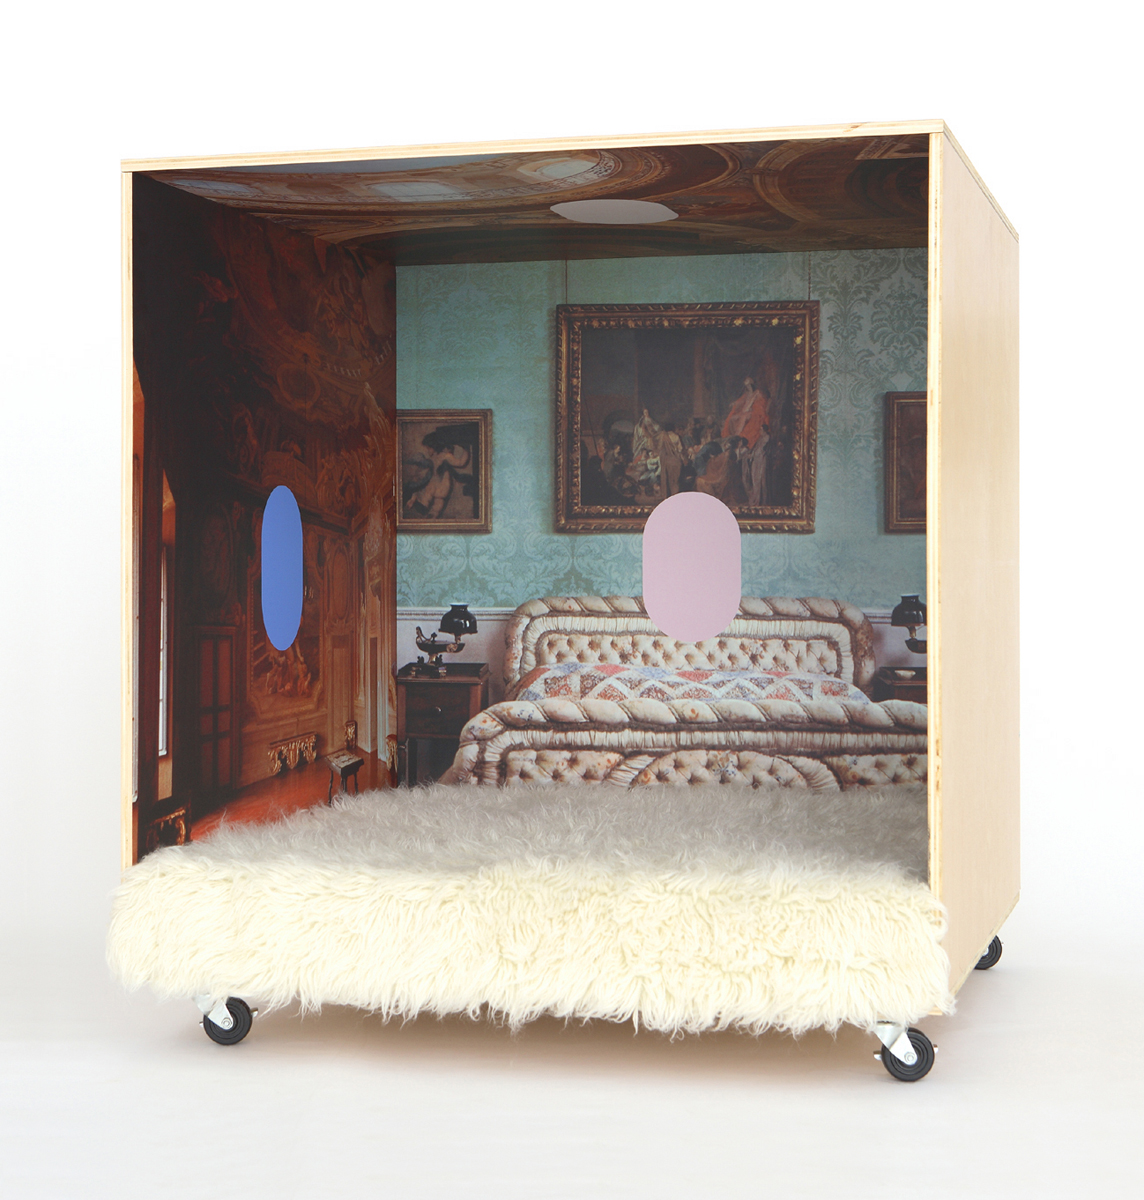 A plywood cube on wheels with an opulent interior with colorful oval graphics.